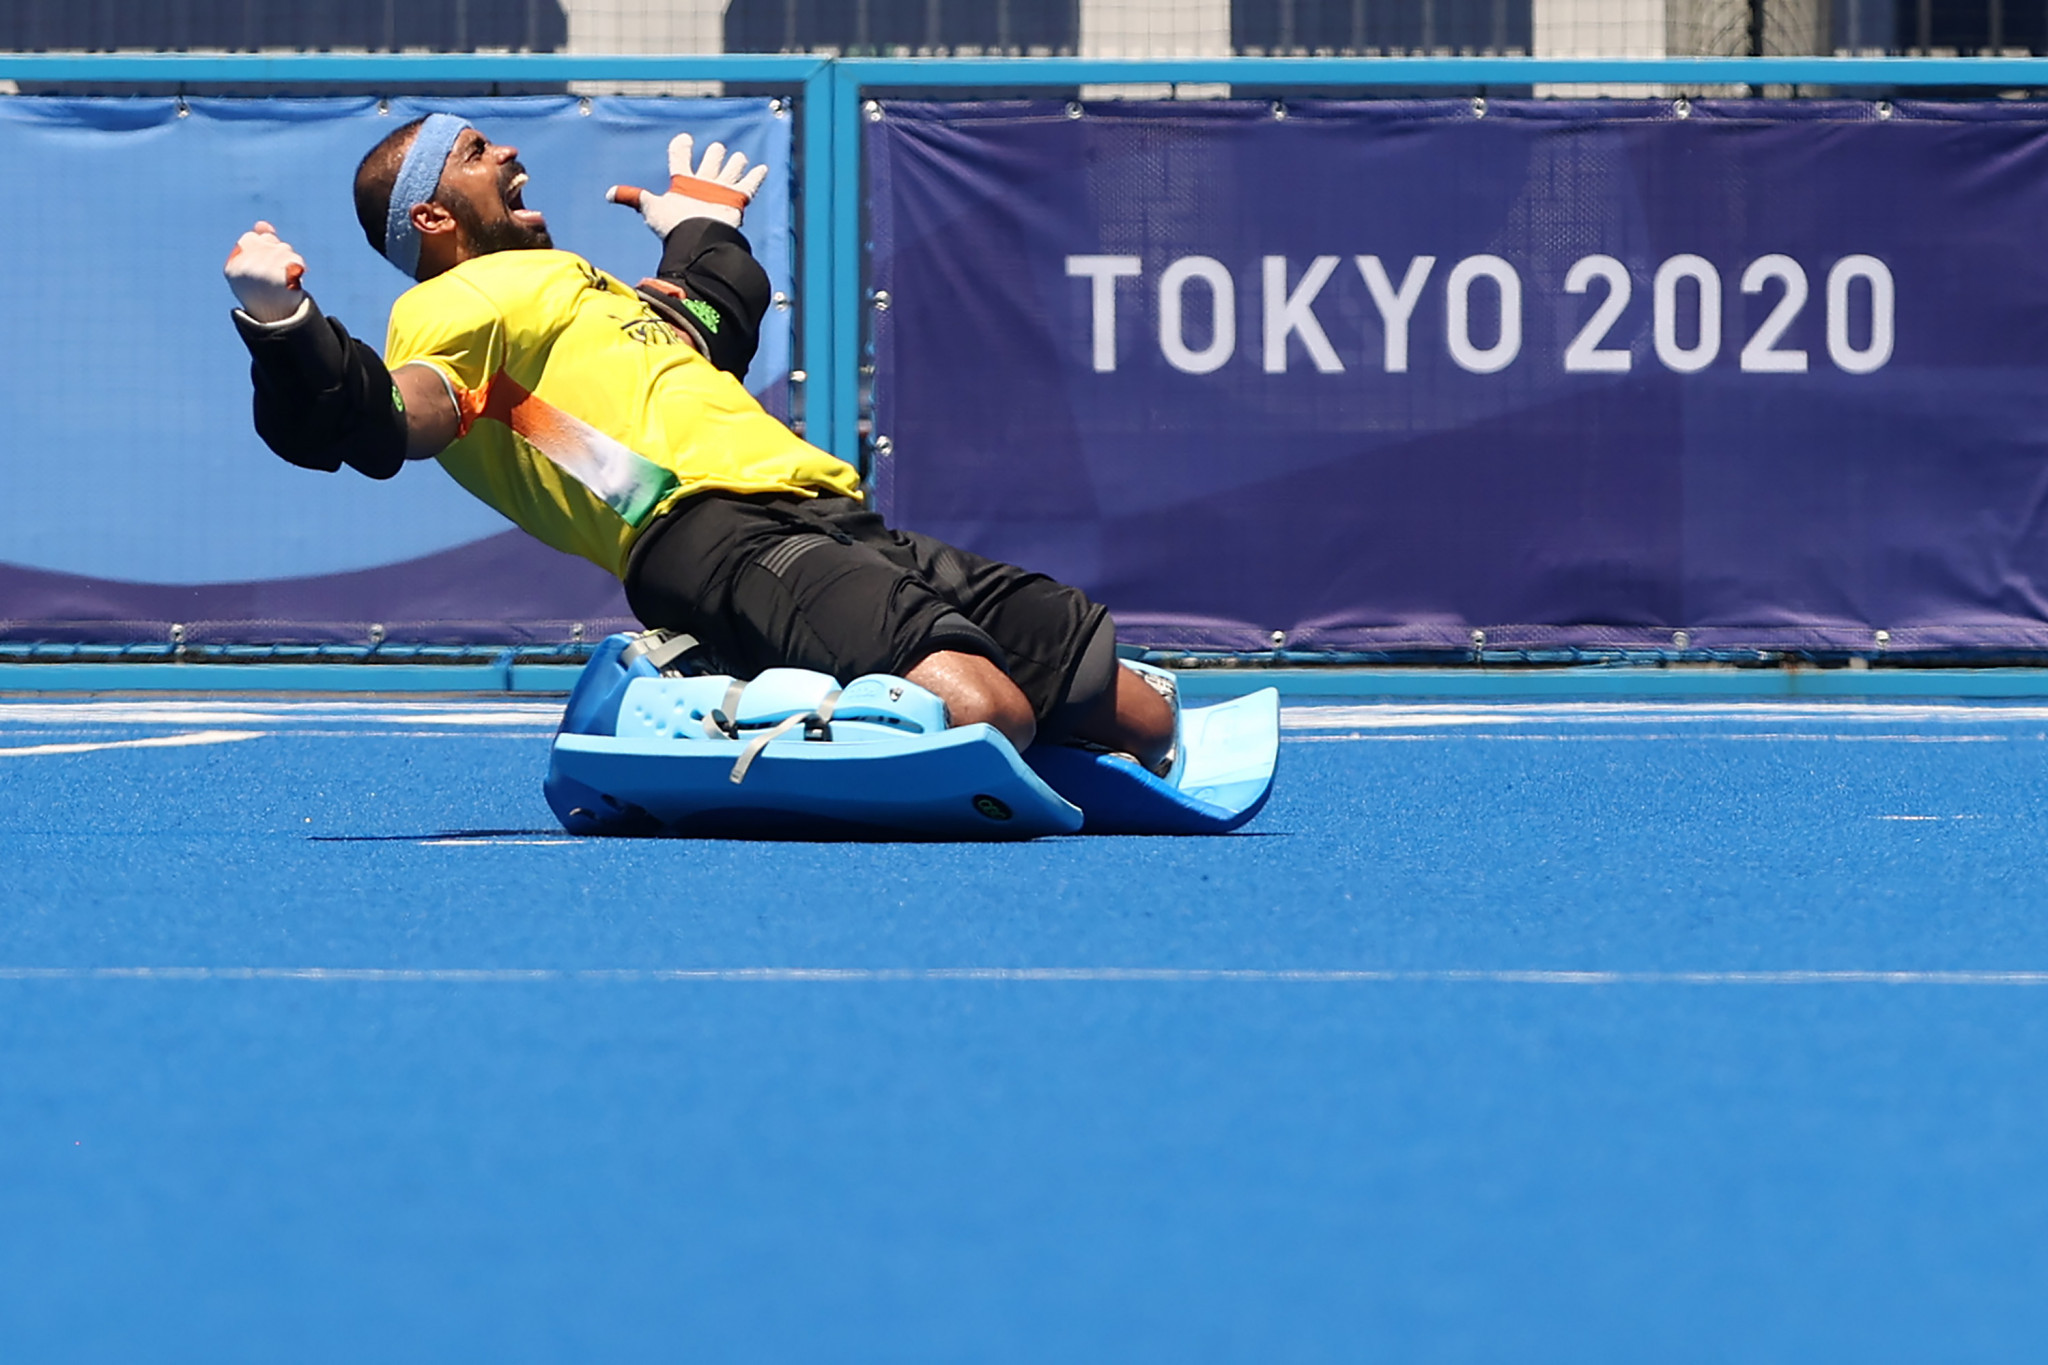 There were jubilant scenes after India broke a 41-year Olympic medal drought with bronze in the men's hockey competition at Tokyo 2020 ©Getty Images